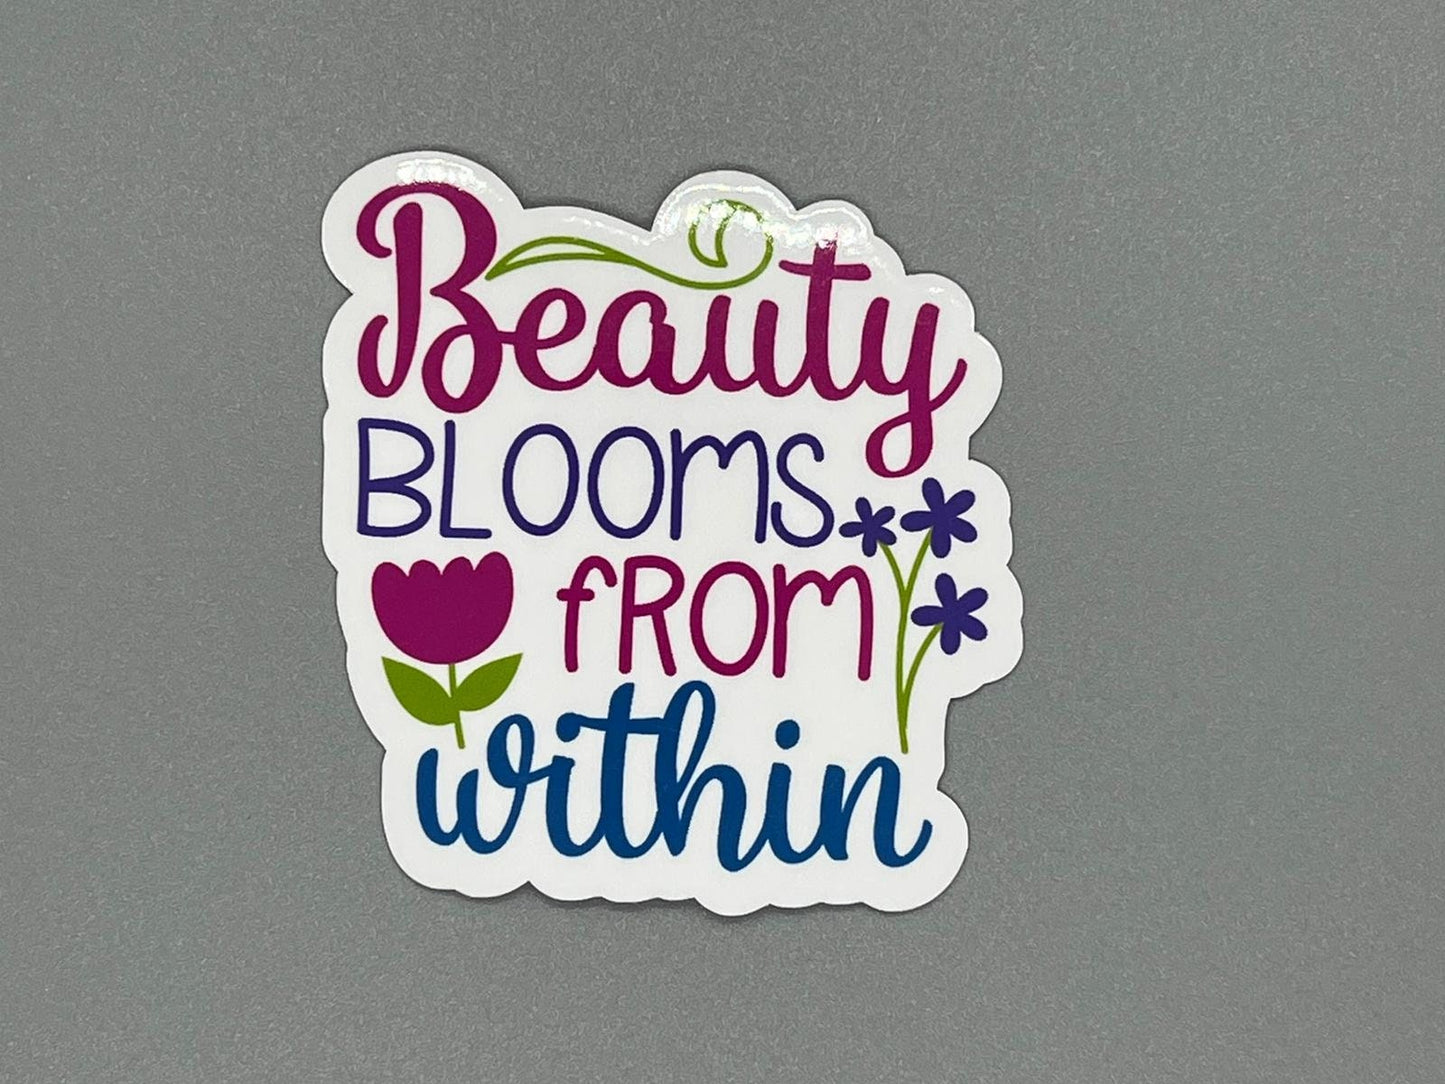 Motivational Messages Stickers - Inspirational Phrases on Vinyl Stickers - Waterproof Weatherproof UV Resistant Laminated